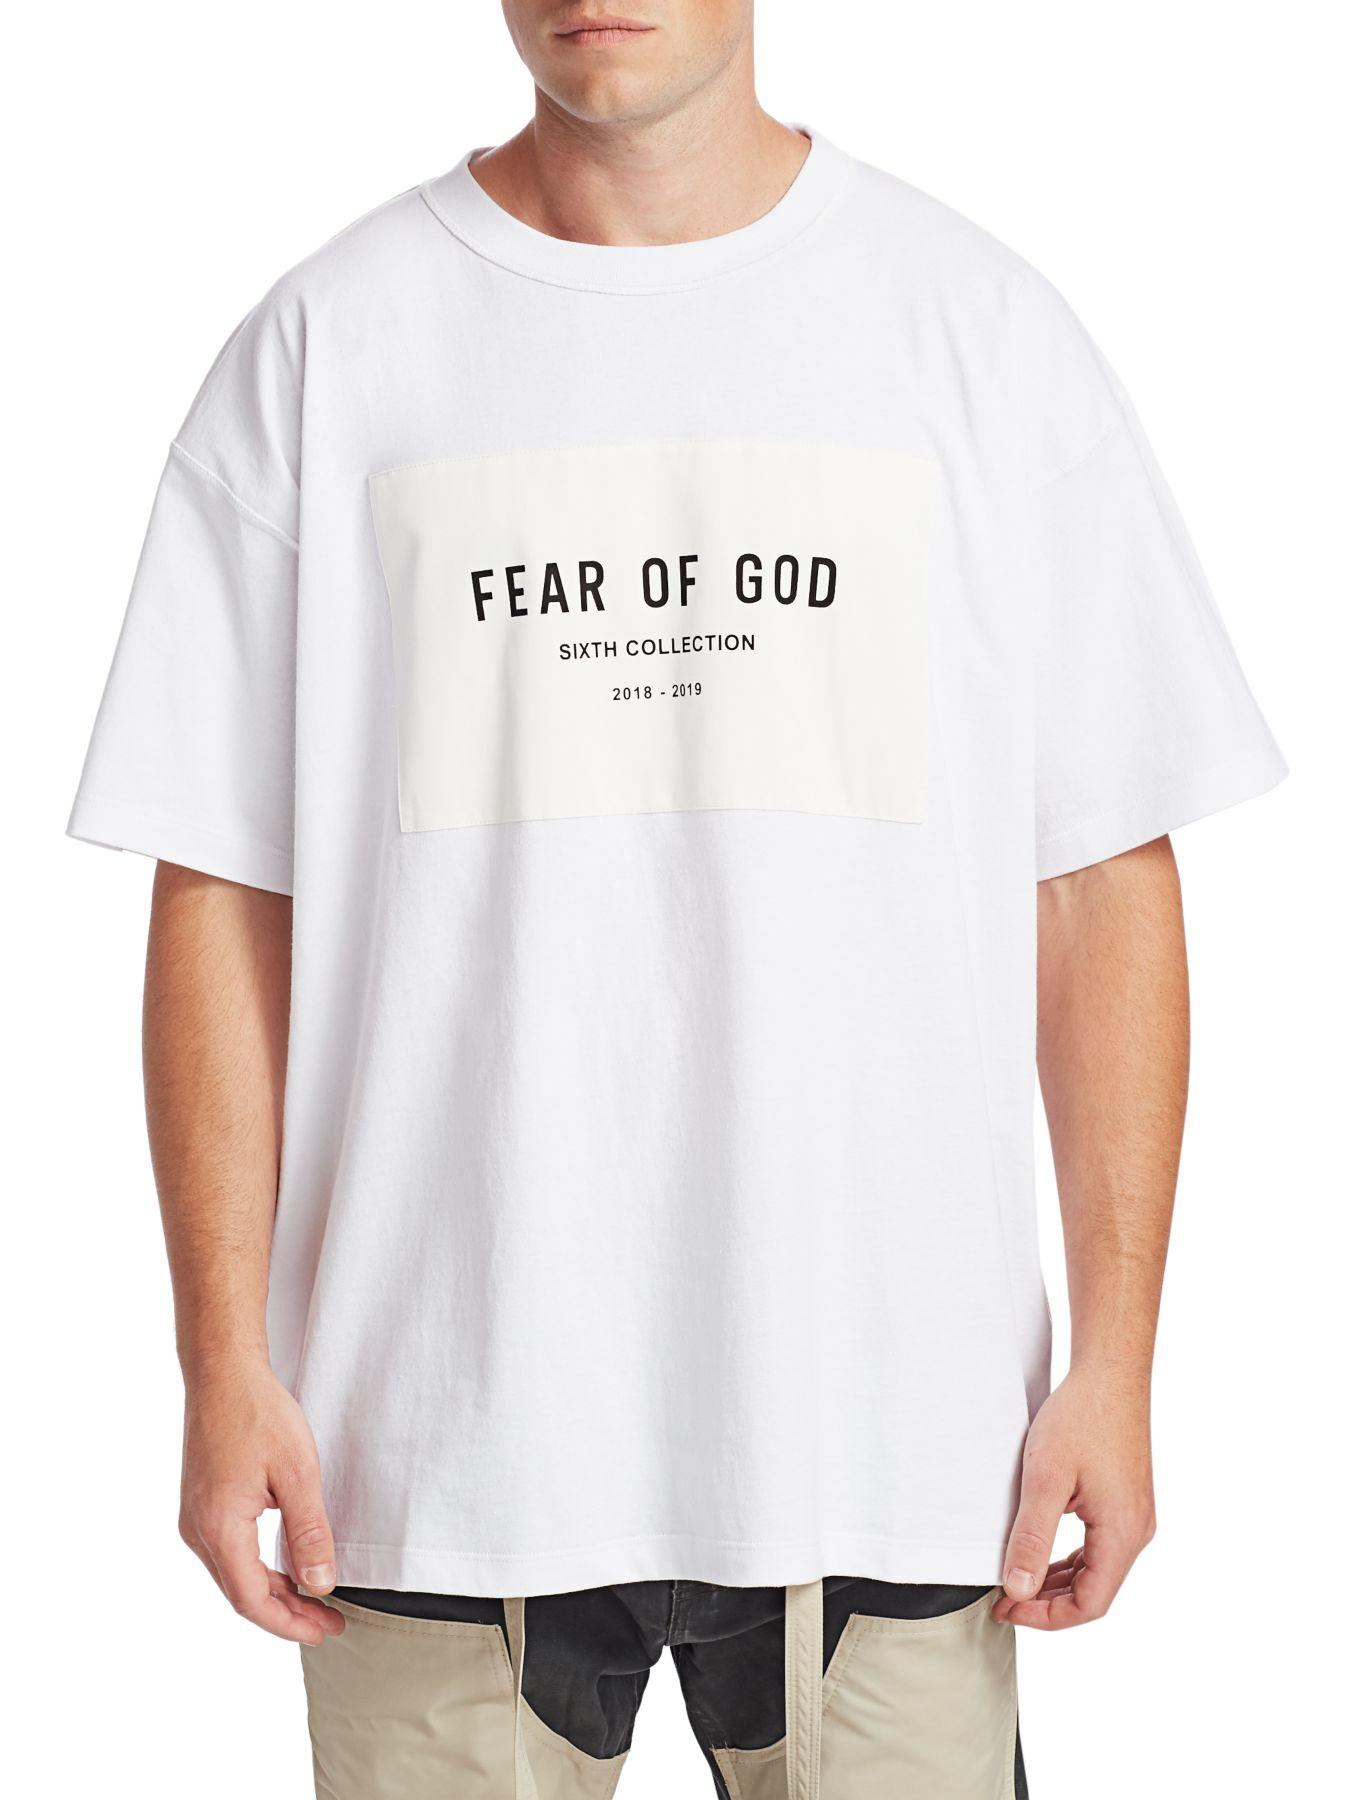 Fear Of God Cotton 6th Collection Tee in White for Men - Lyst